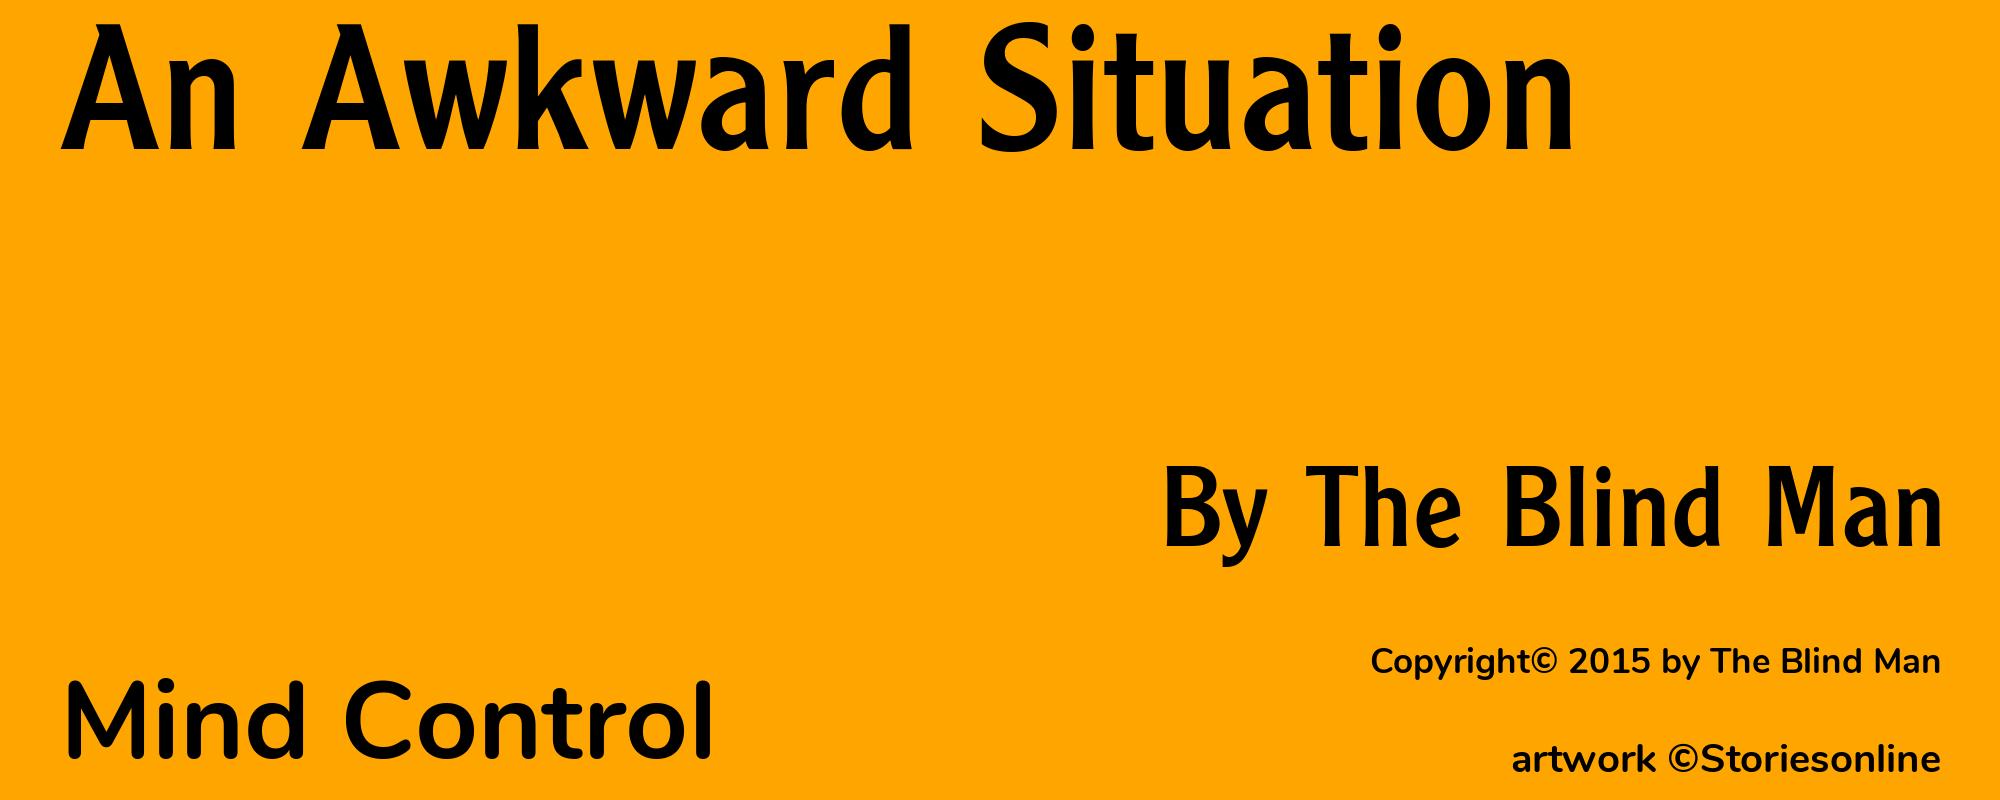 An Awkward Situation - Cover